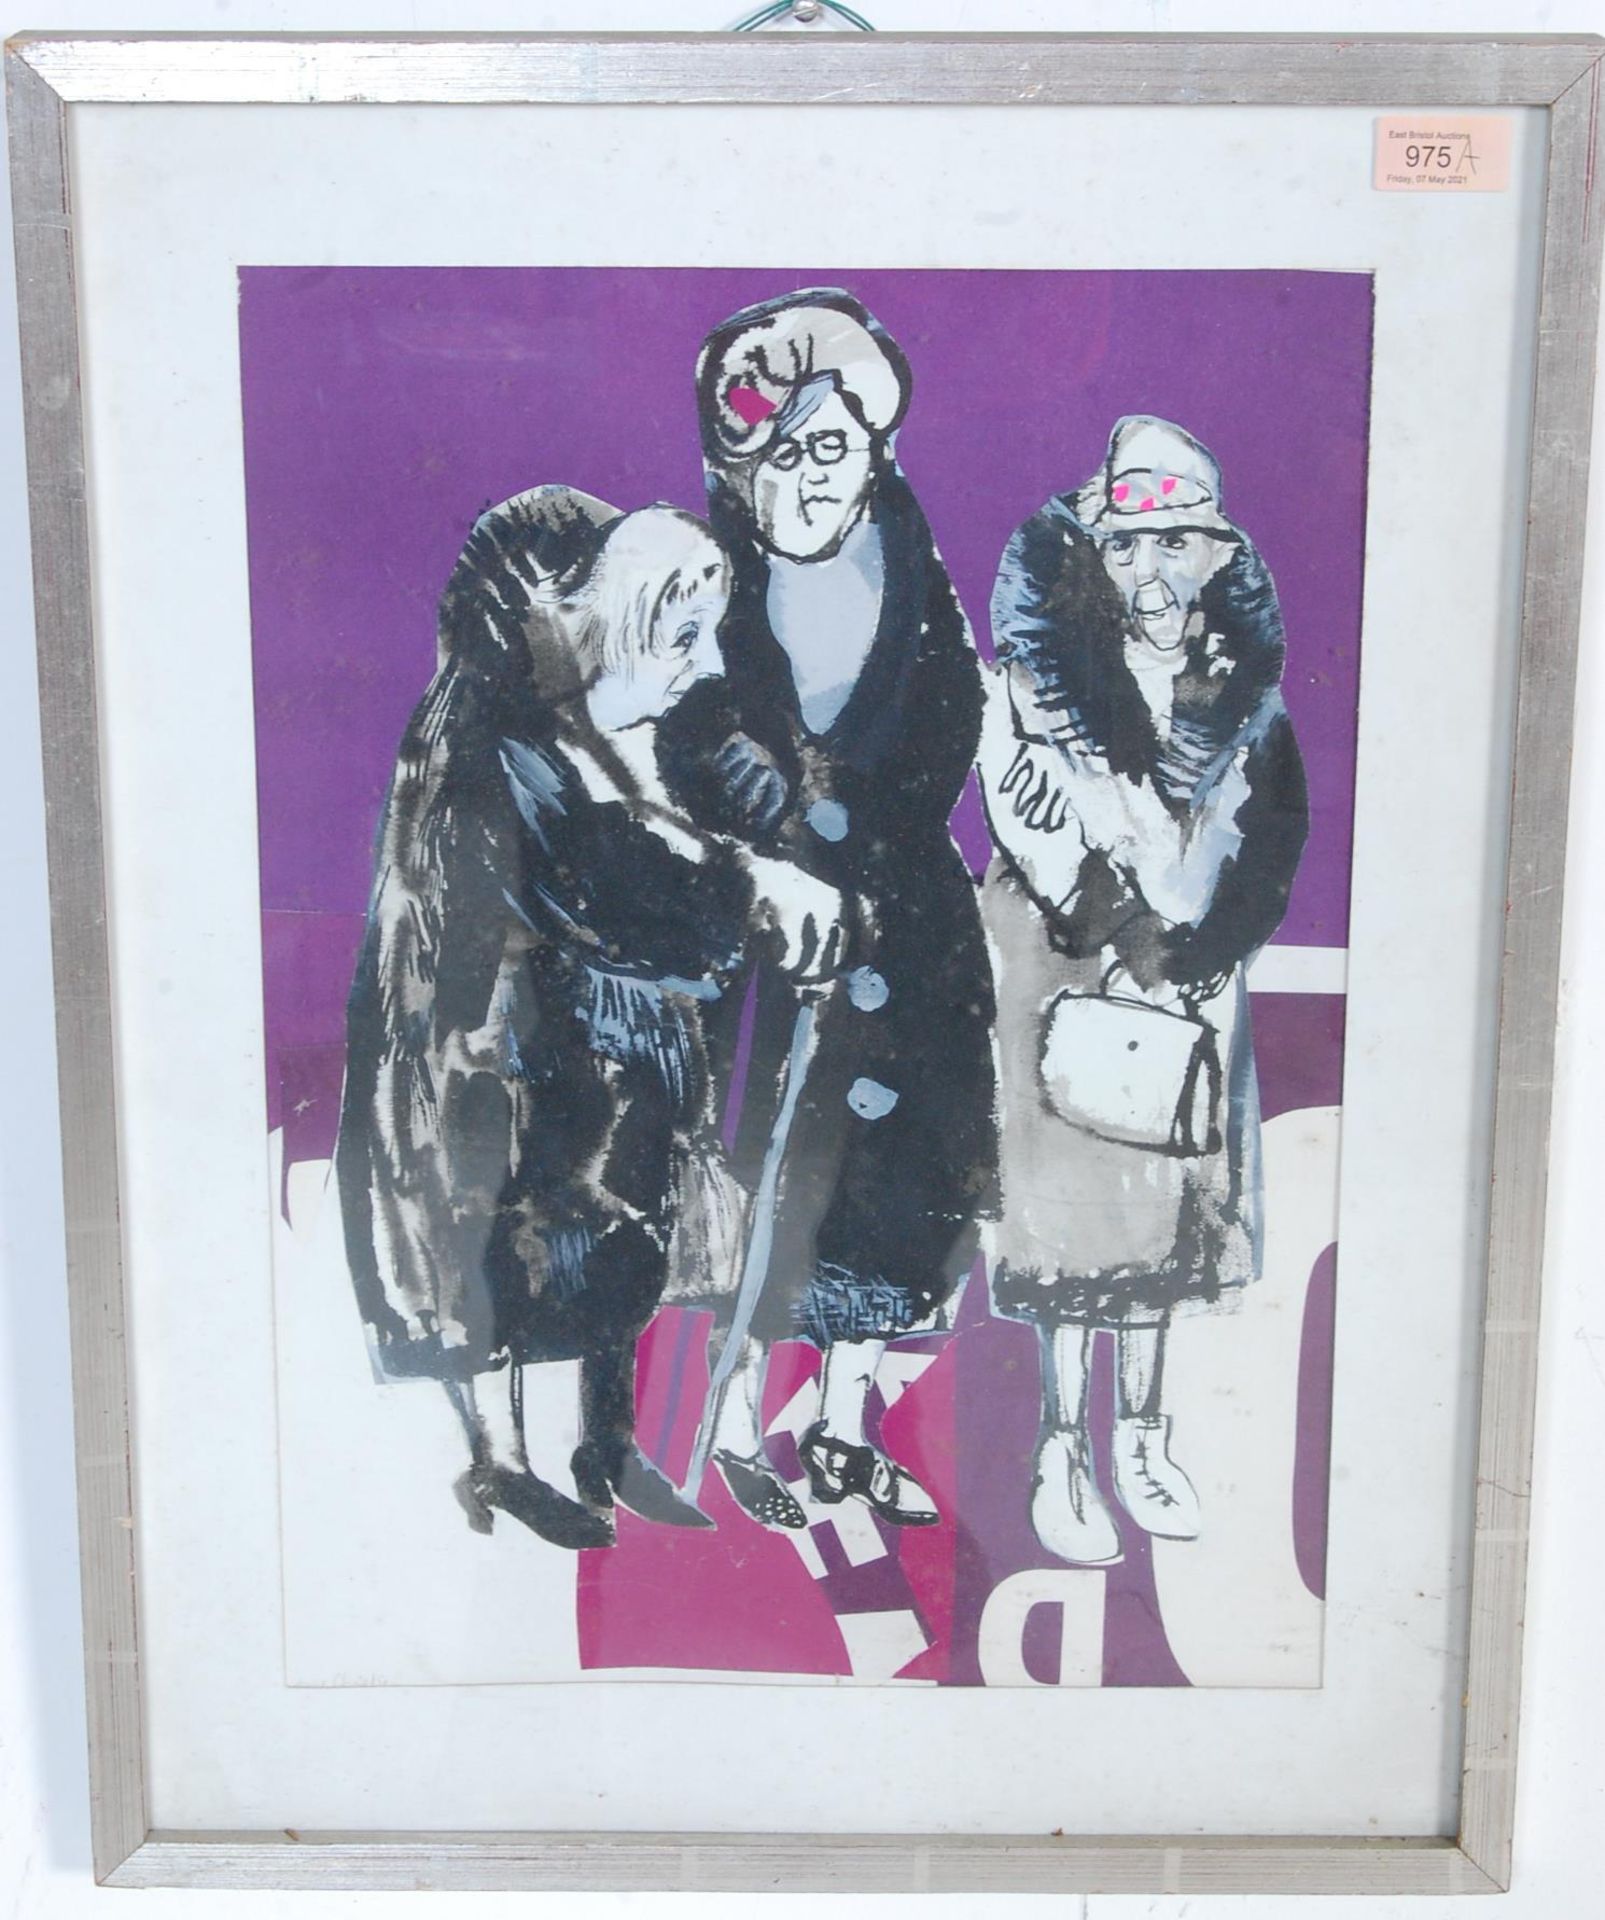 ANNE CHRISTIE - THREE OLD LADIES - COLLAGE AND WASH PICTURE / PAINTING